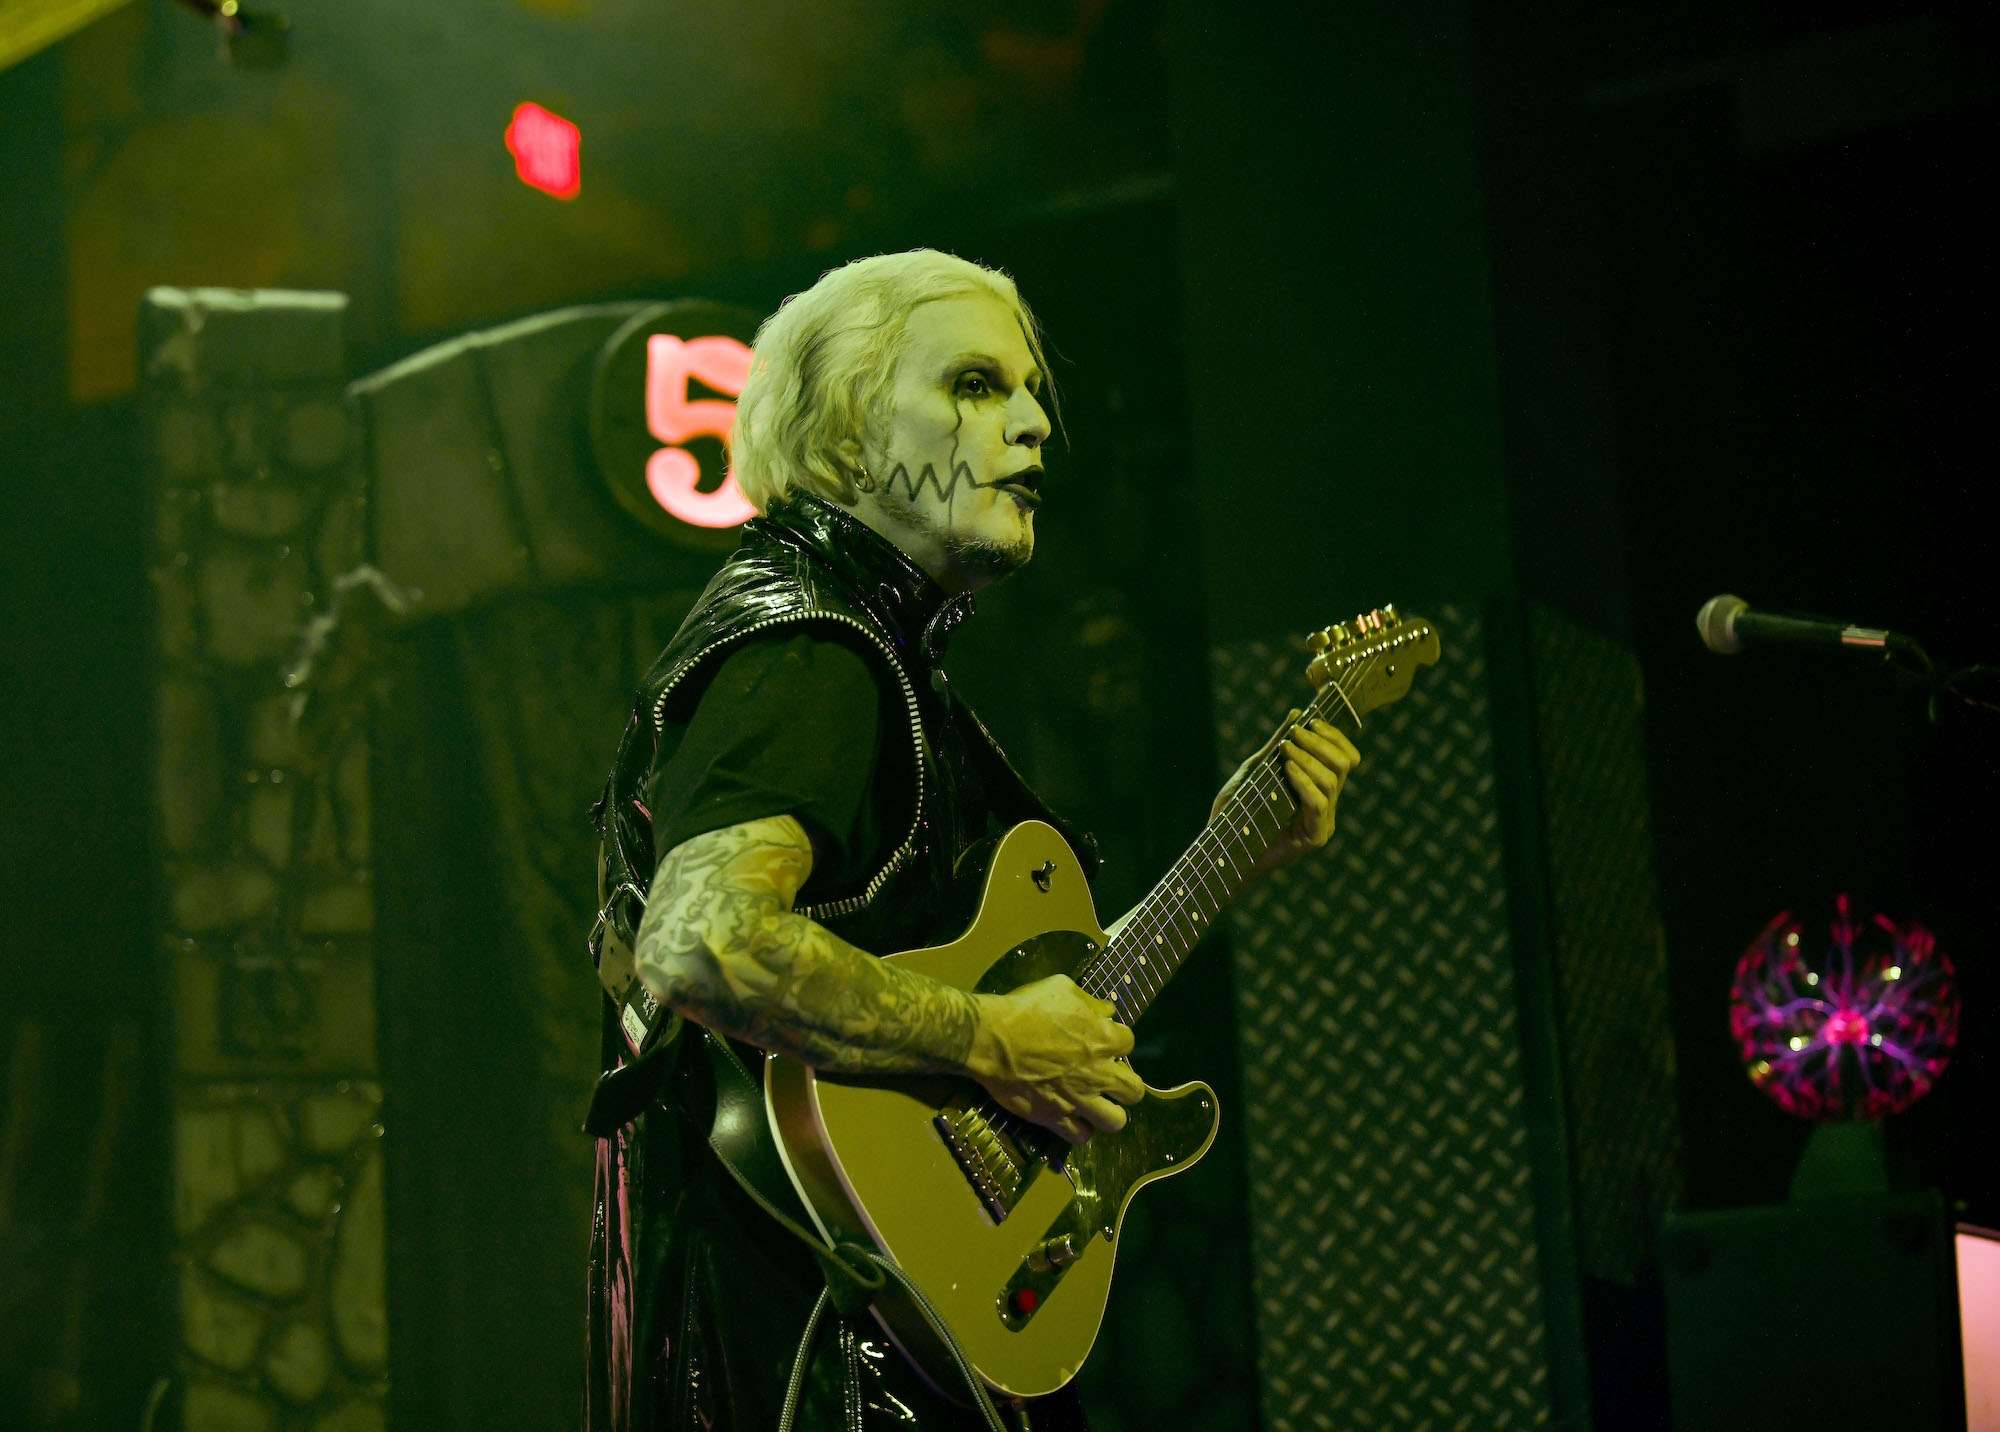 John 5 Live at The Forge [GALLERY] 9